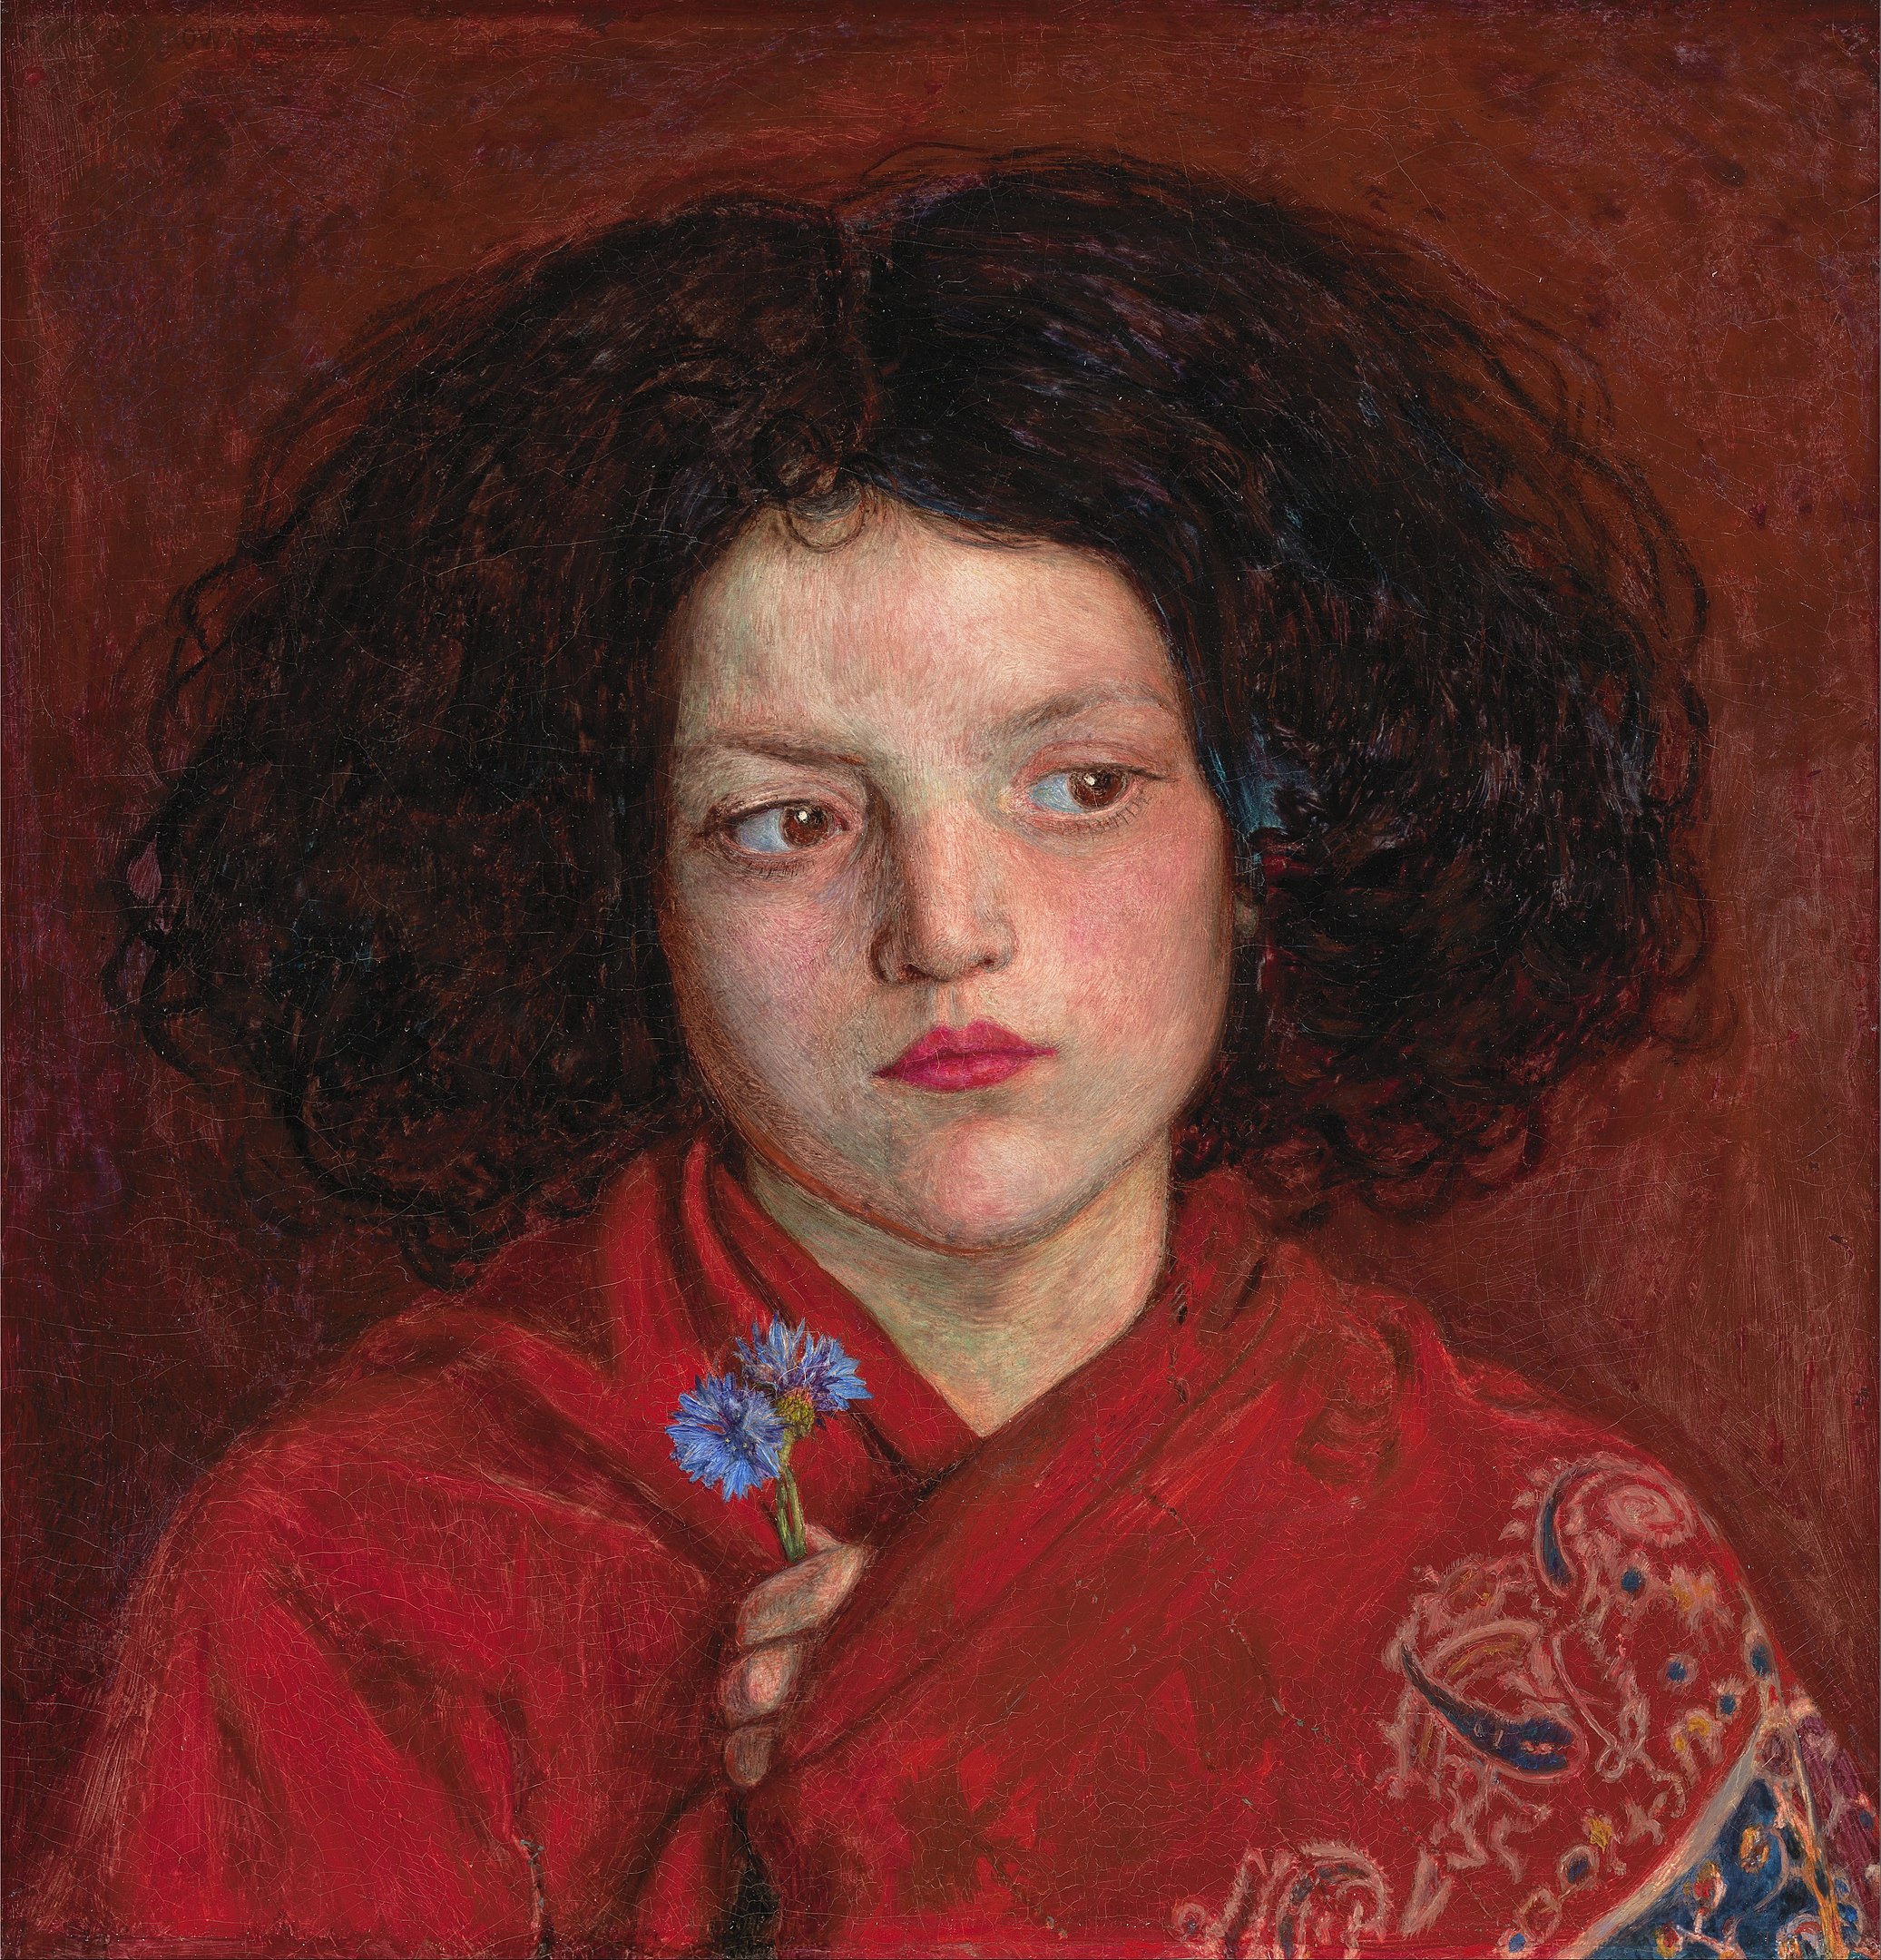 A portrait of a young girl looking away